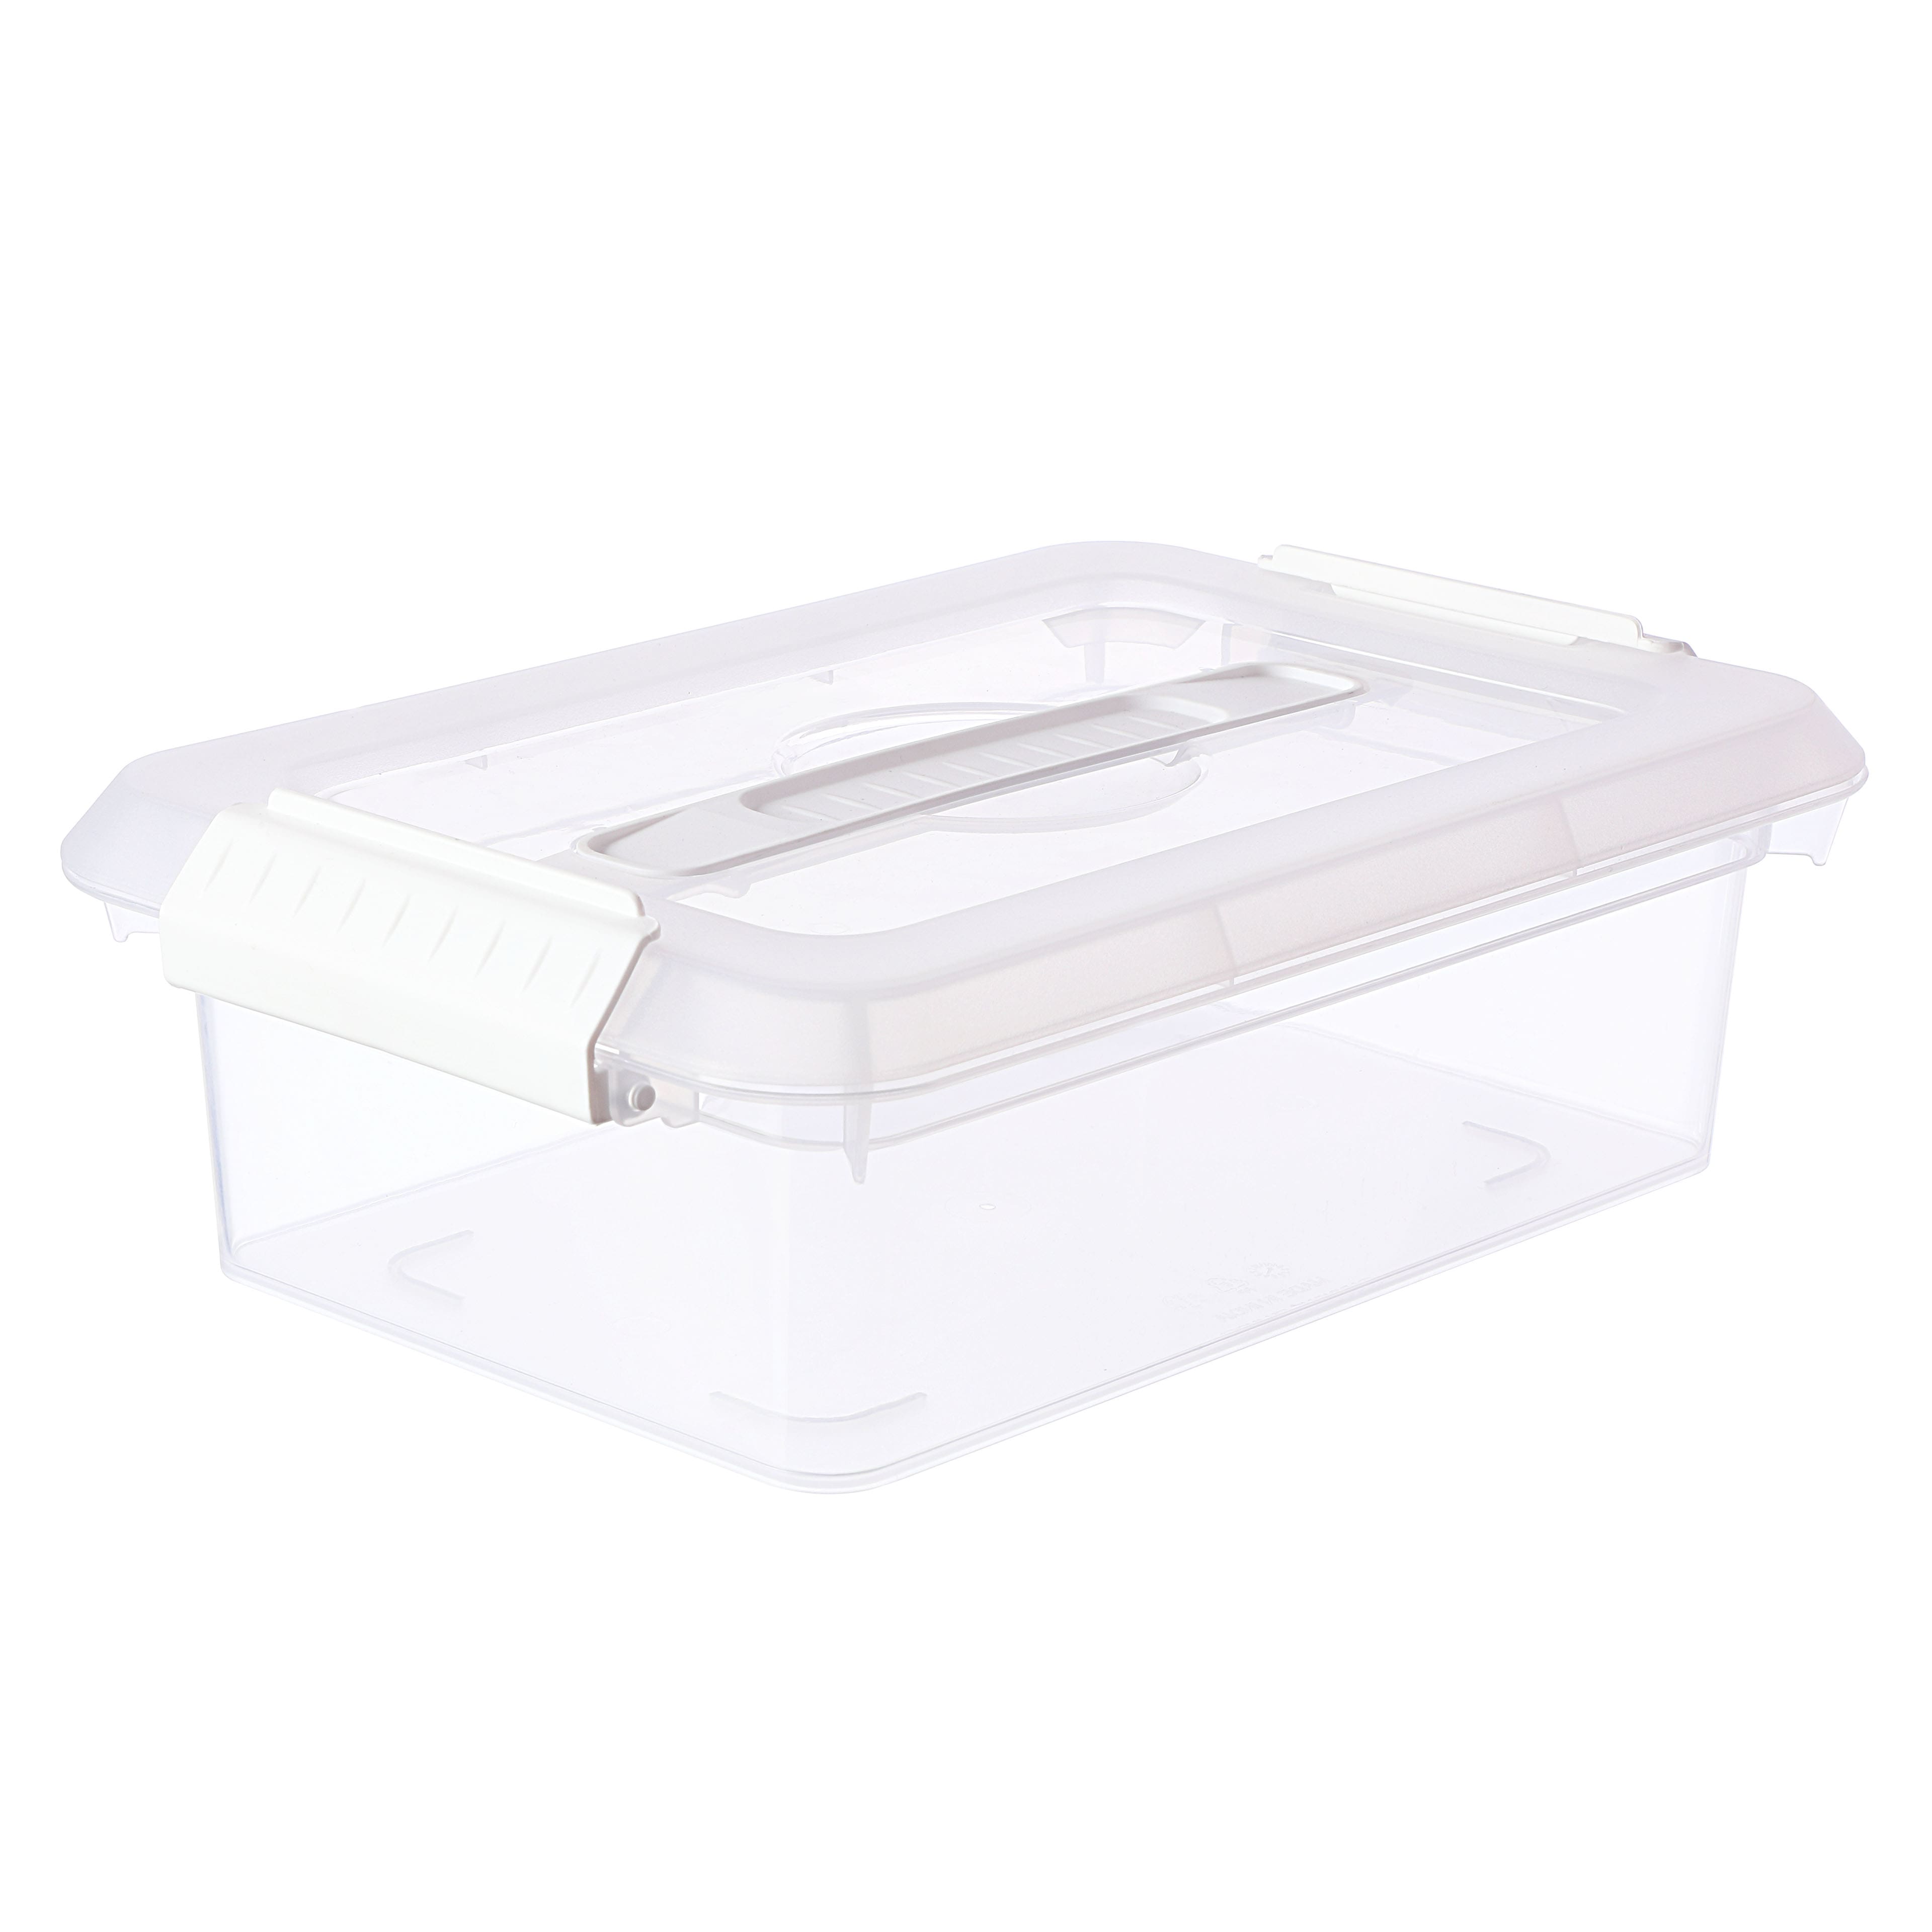 8W X 4D X 11.5H Plastic Food Storage Container With Snap Lid